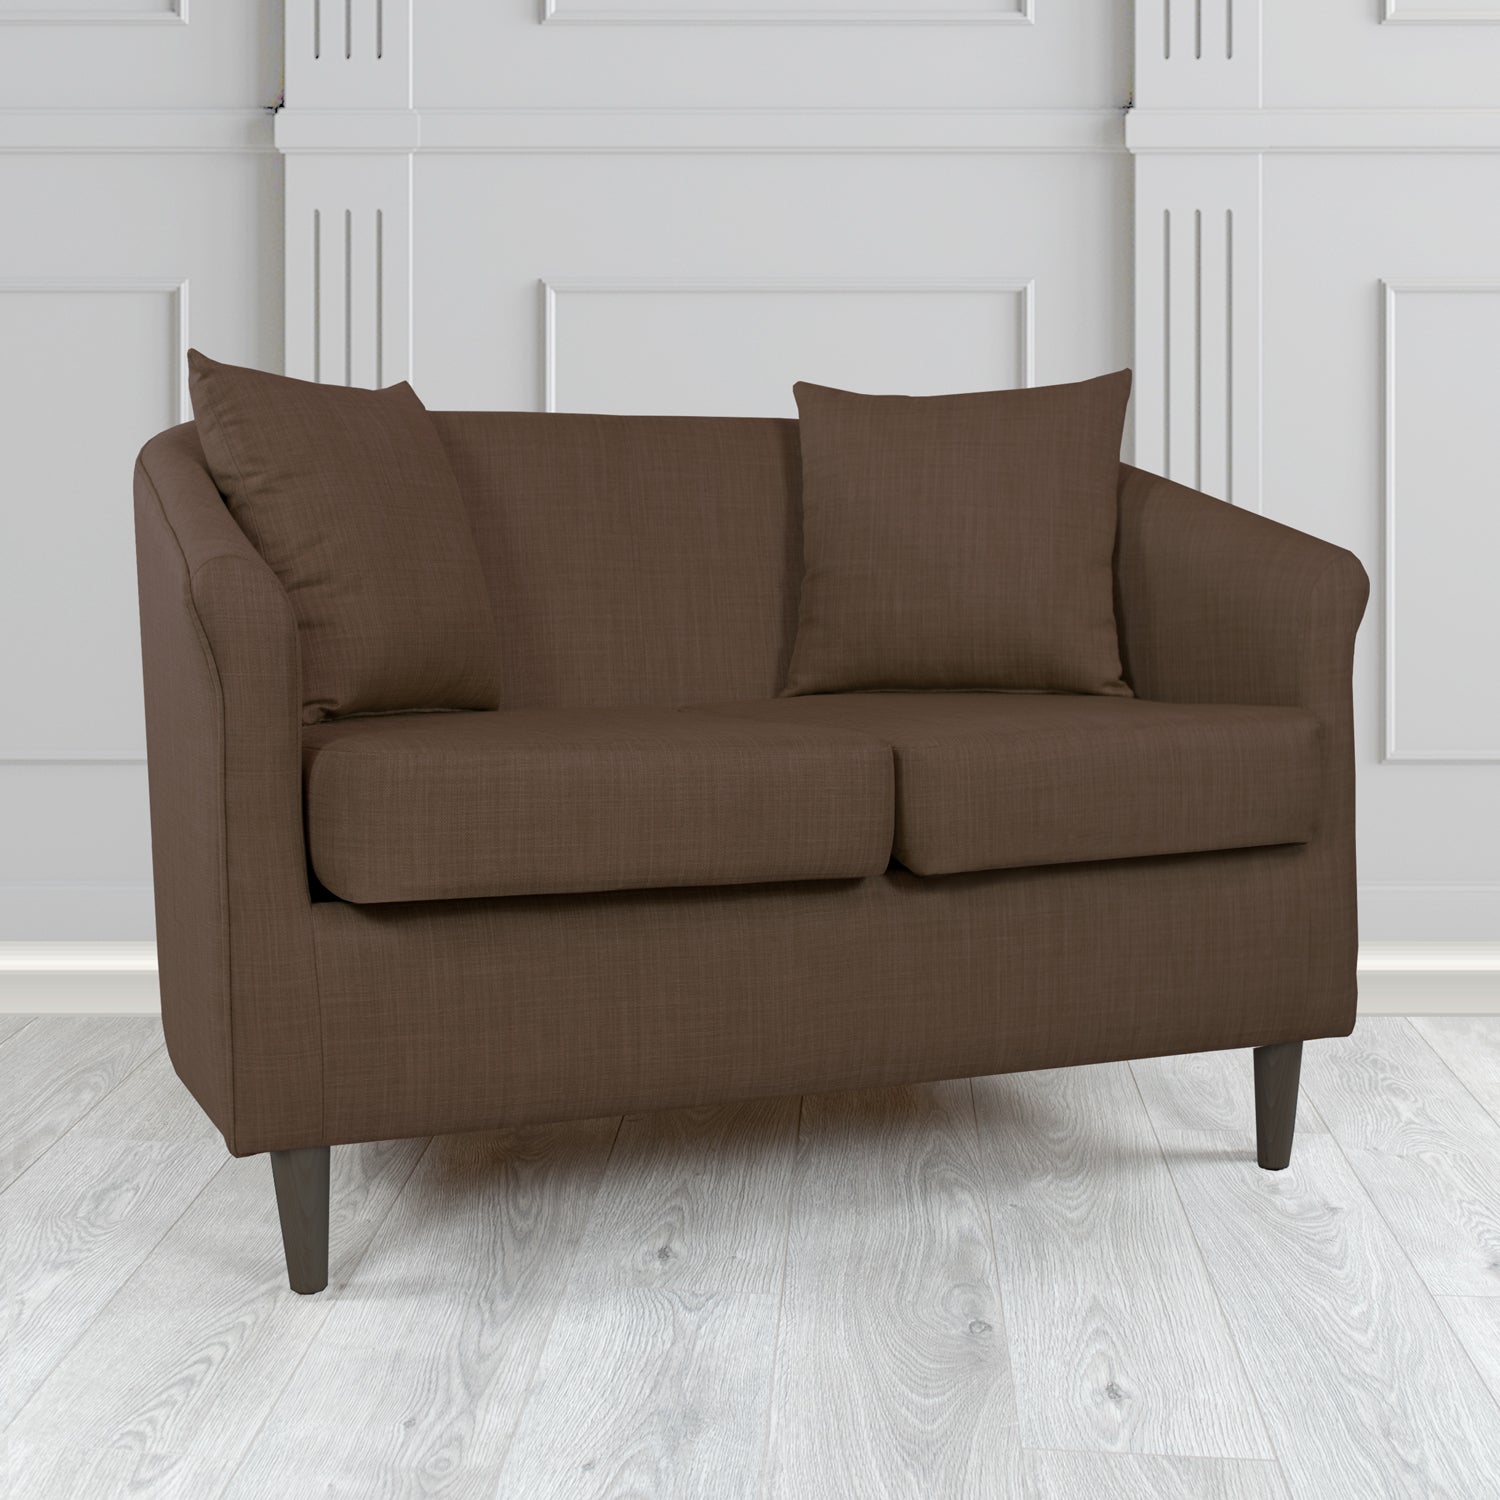 St Tropez Charles Sandalwood Plain Linen Fabric 2 Seater Tub Sofa with Scatter Cushions - The Tub Chair Shop